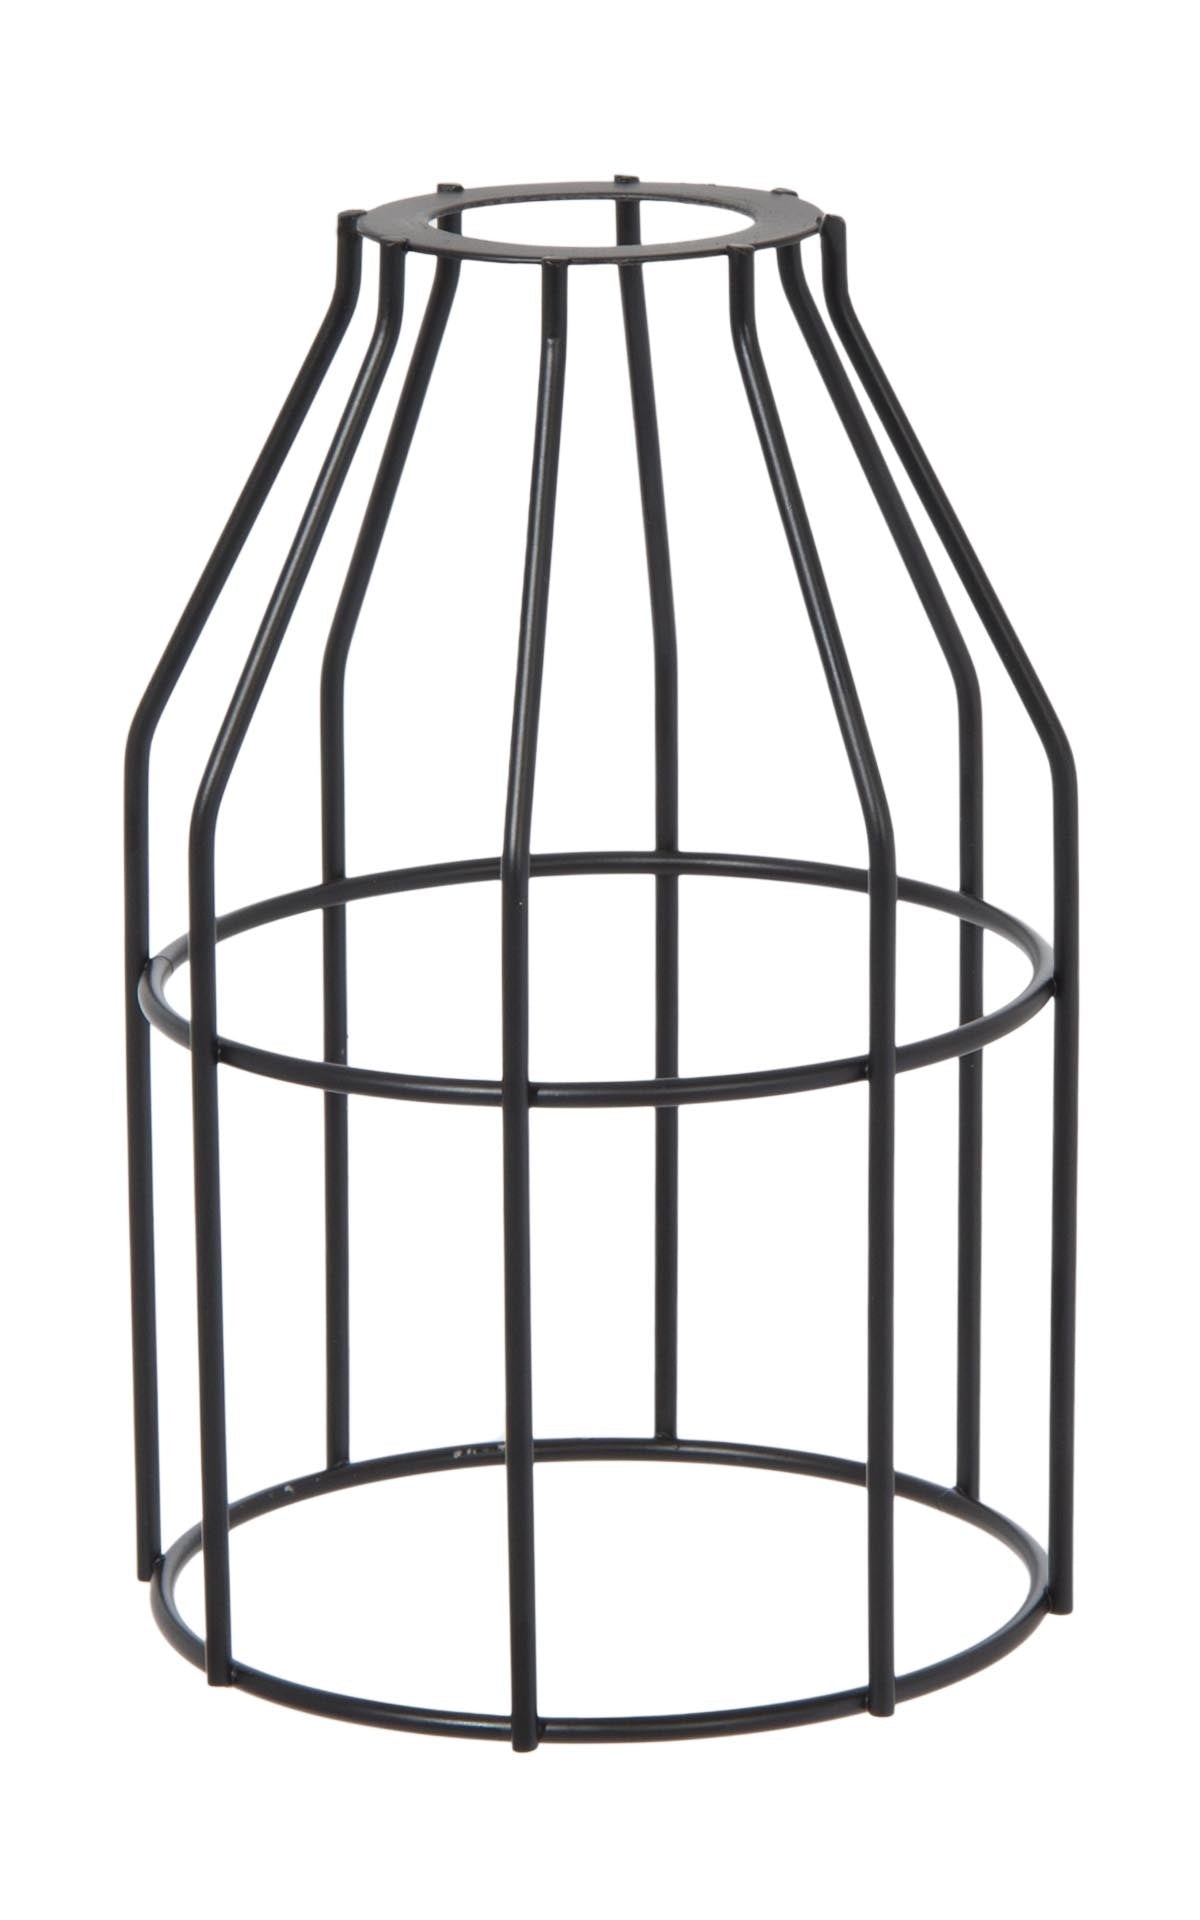 Satin Black Finish Steel Wire Bulb Cage, Slip On Washer Type